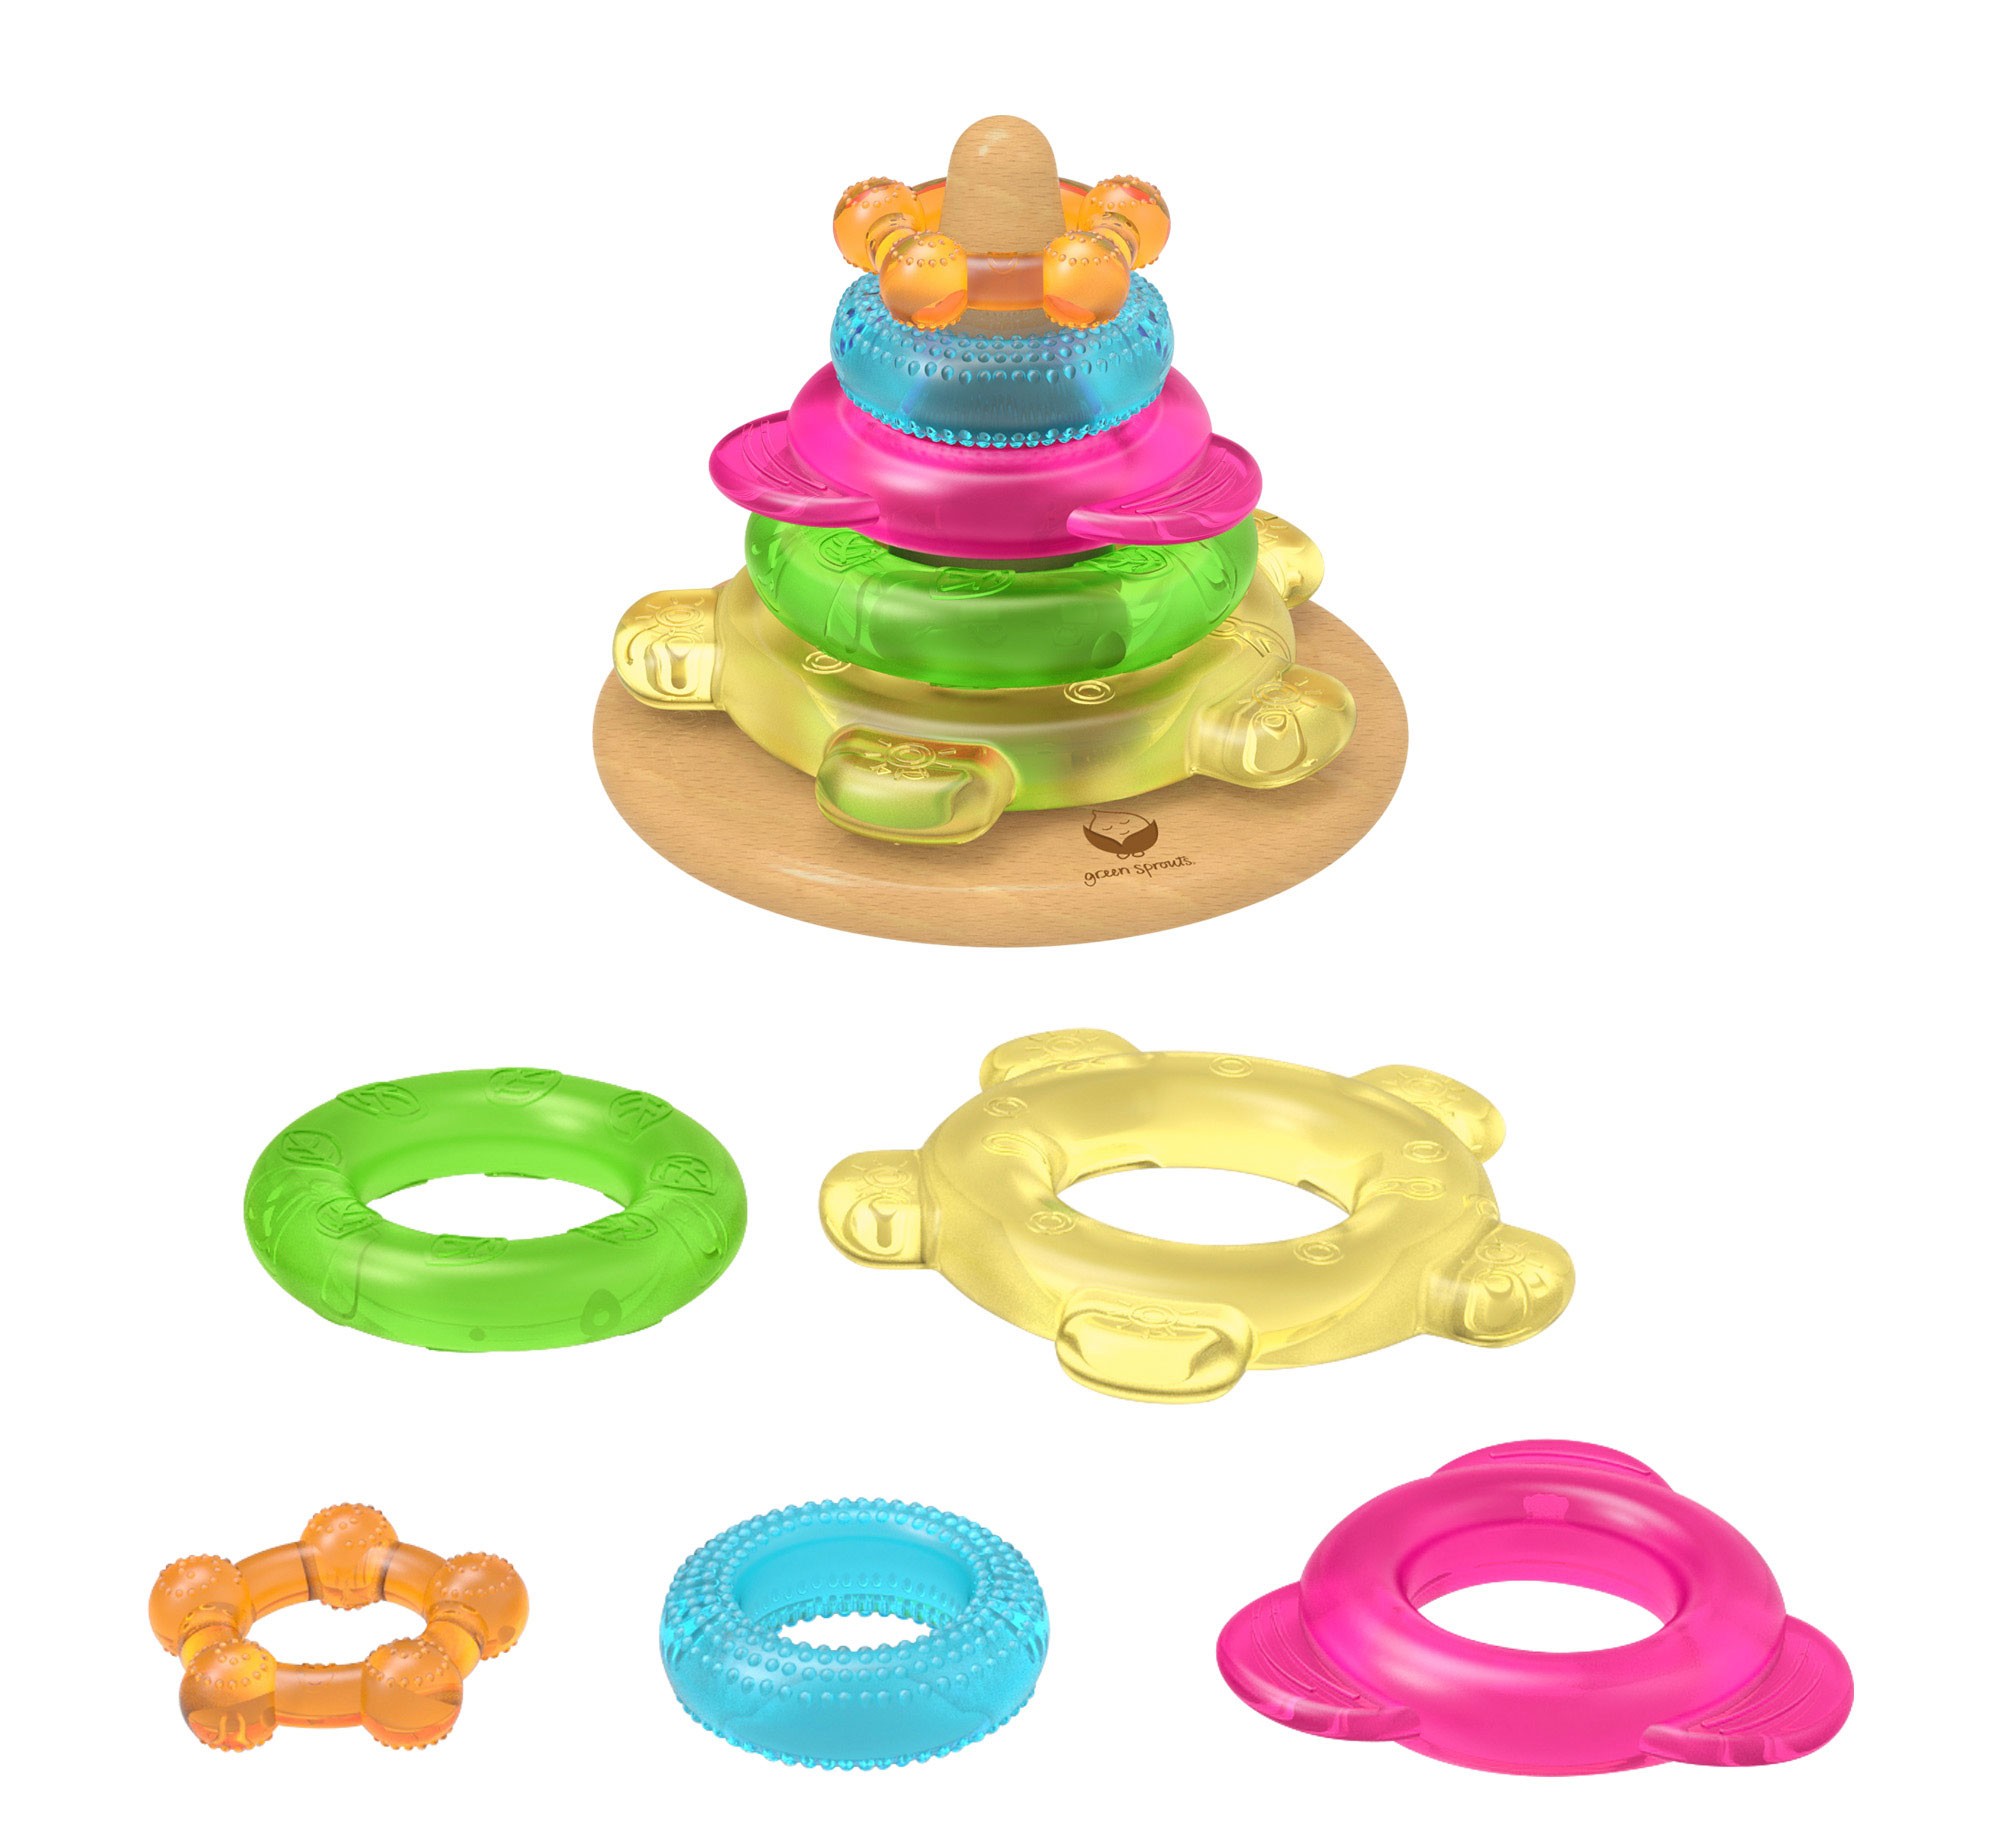 iPlay Green Sprouts Teether Tower Toy